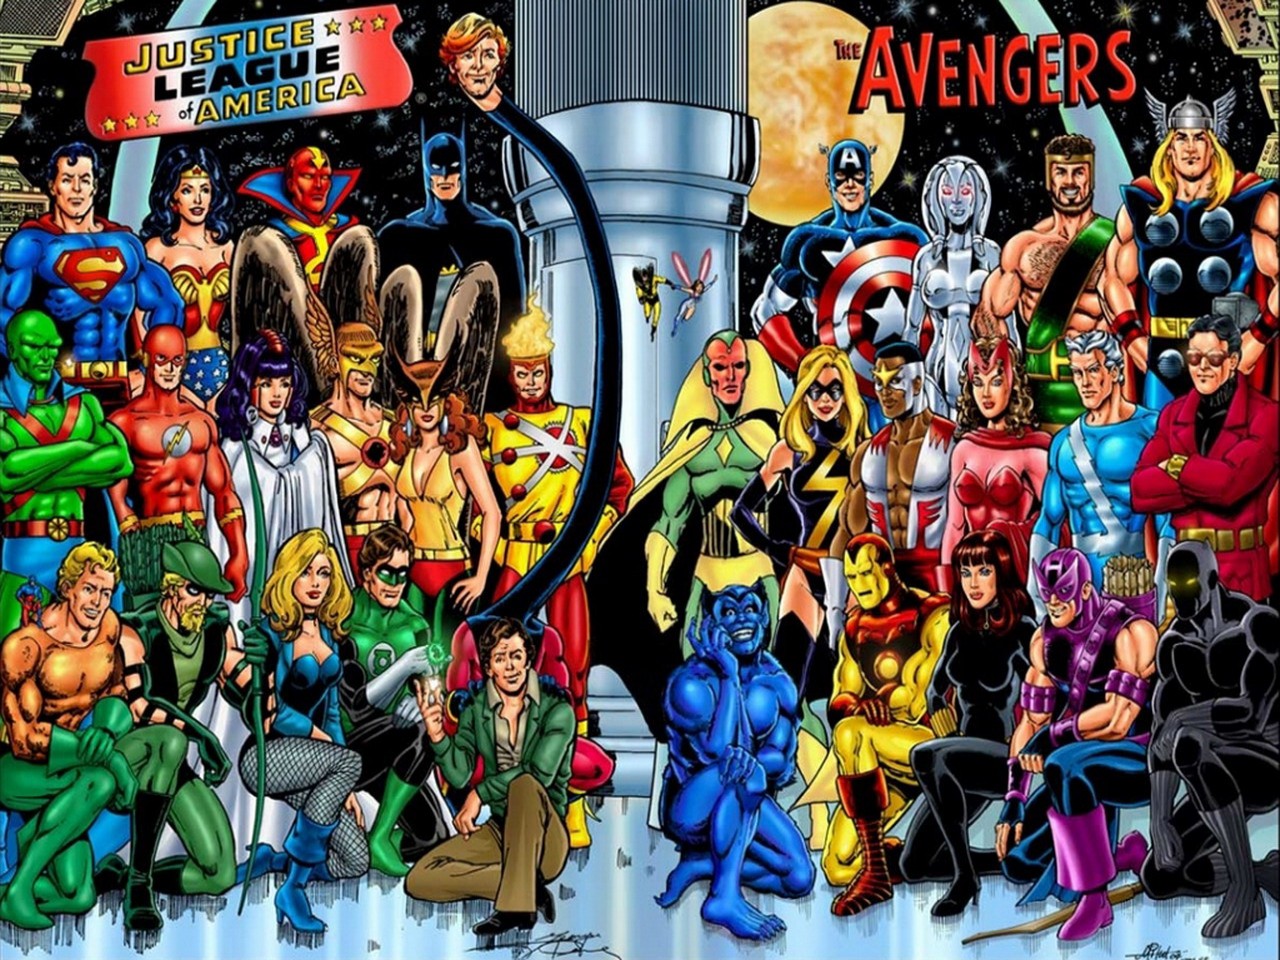 Justice League of America vs The Avengers